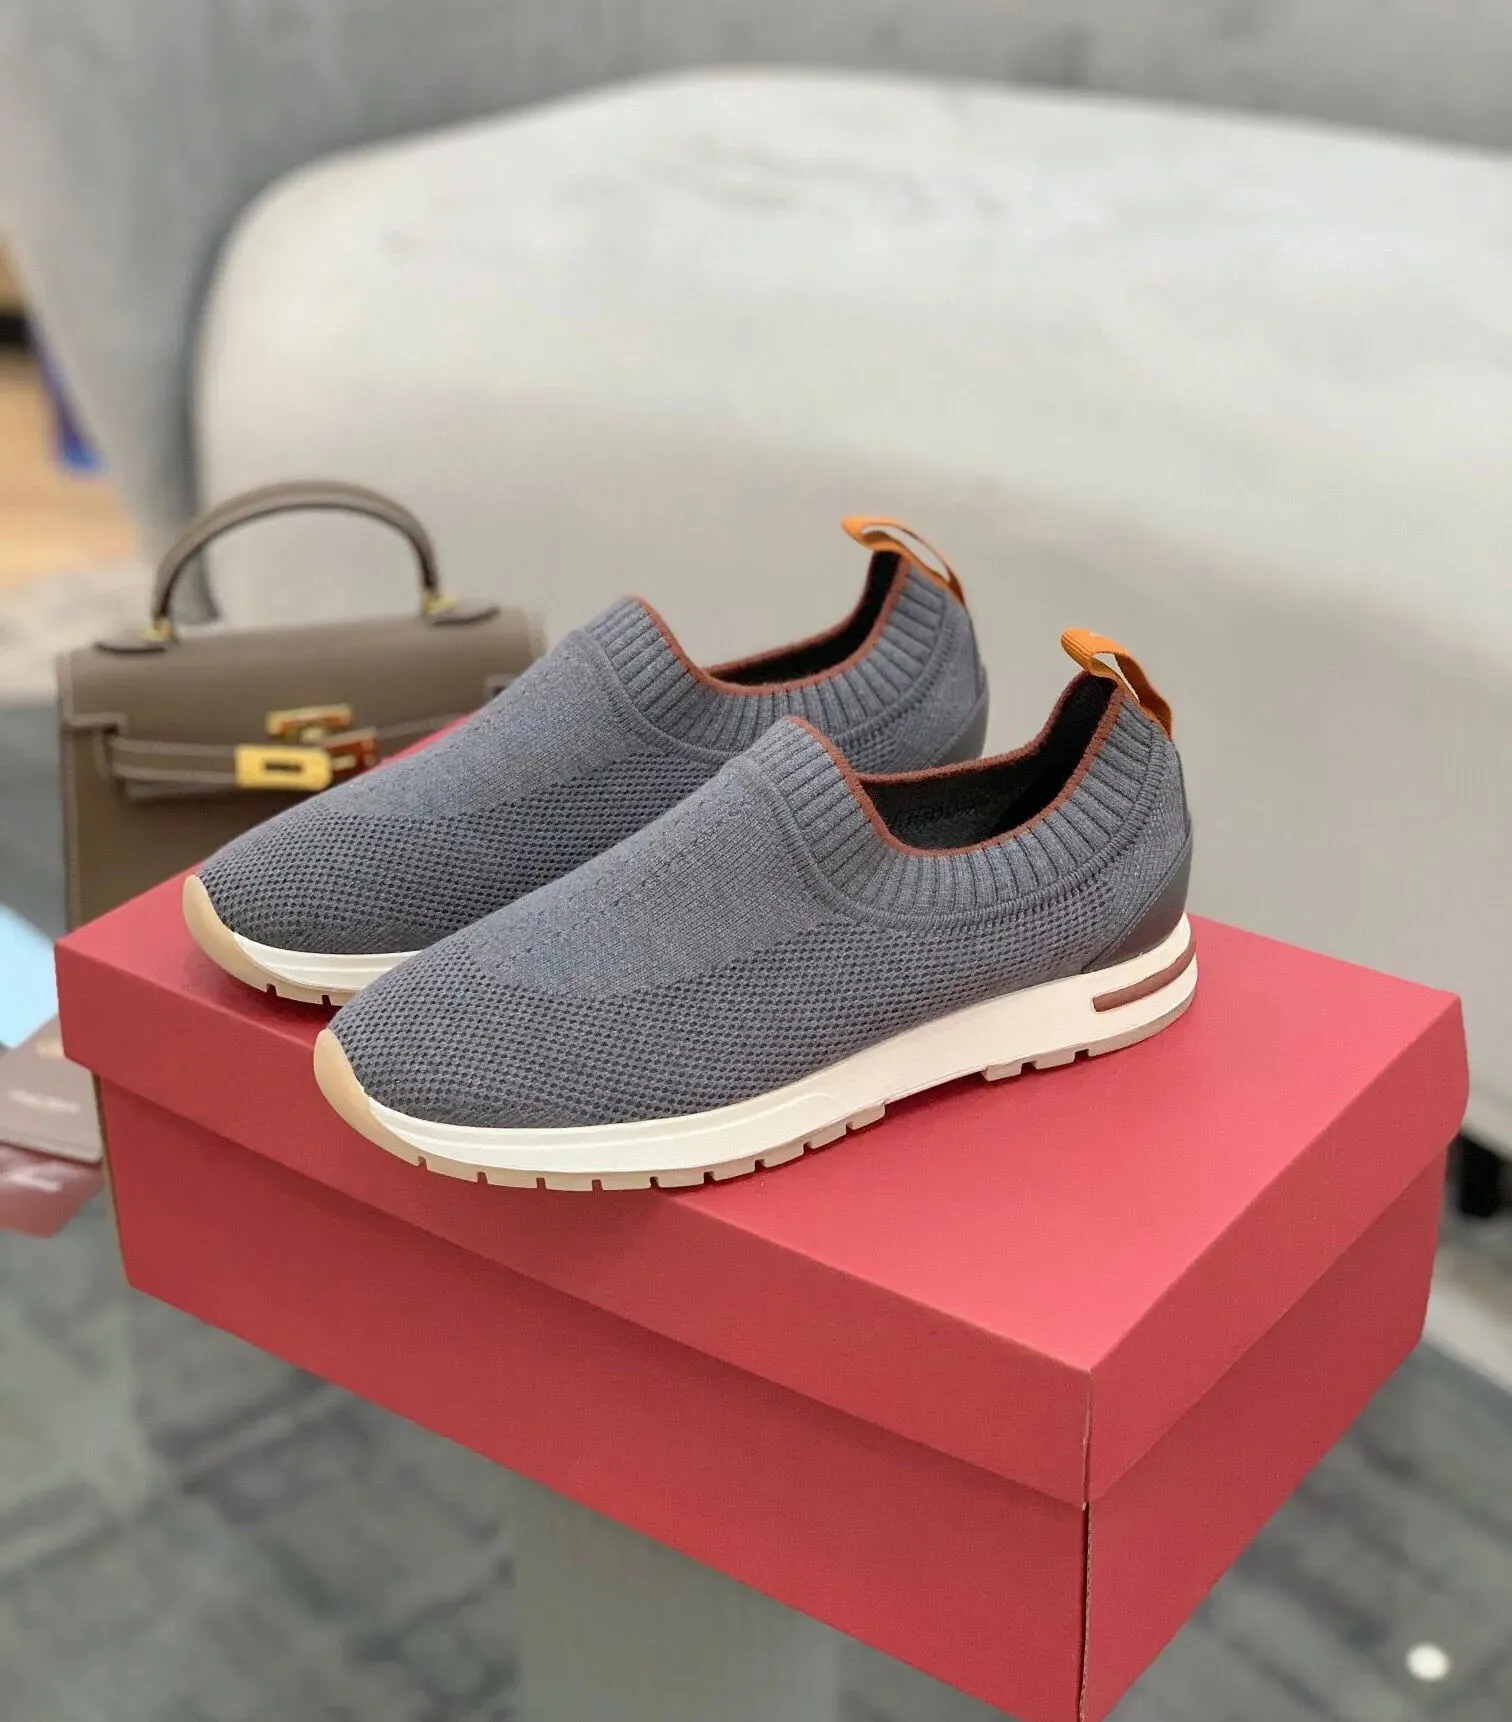 Desginer Men casual sneaker Brunello knitted platform sneaker elastic cashmere low top round toe rubber soles light sports trainers 35-46Box nice quality